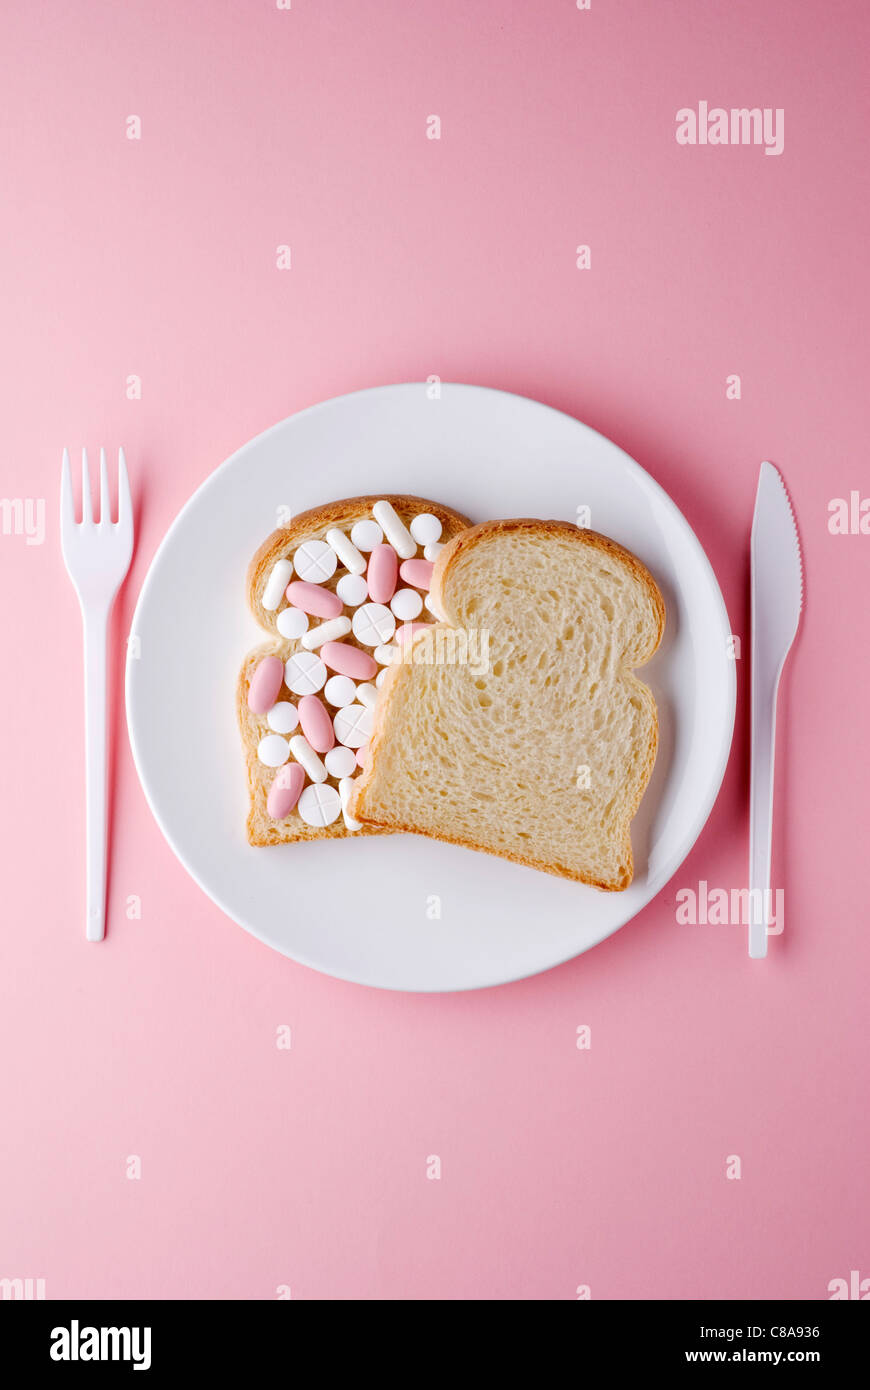 Bread sandwich filled with medecine Stock Photo